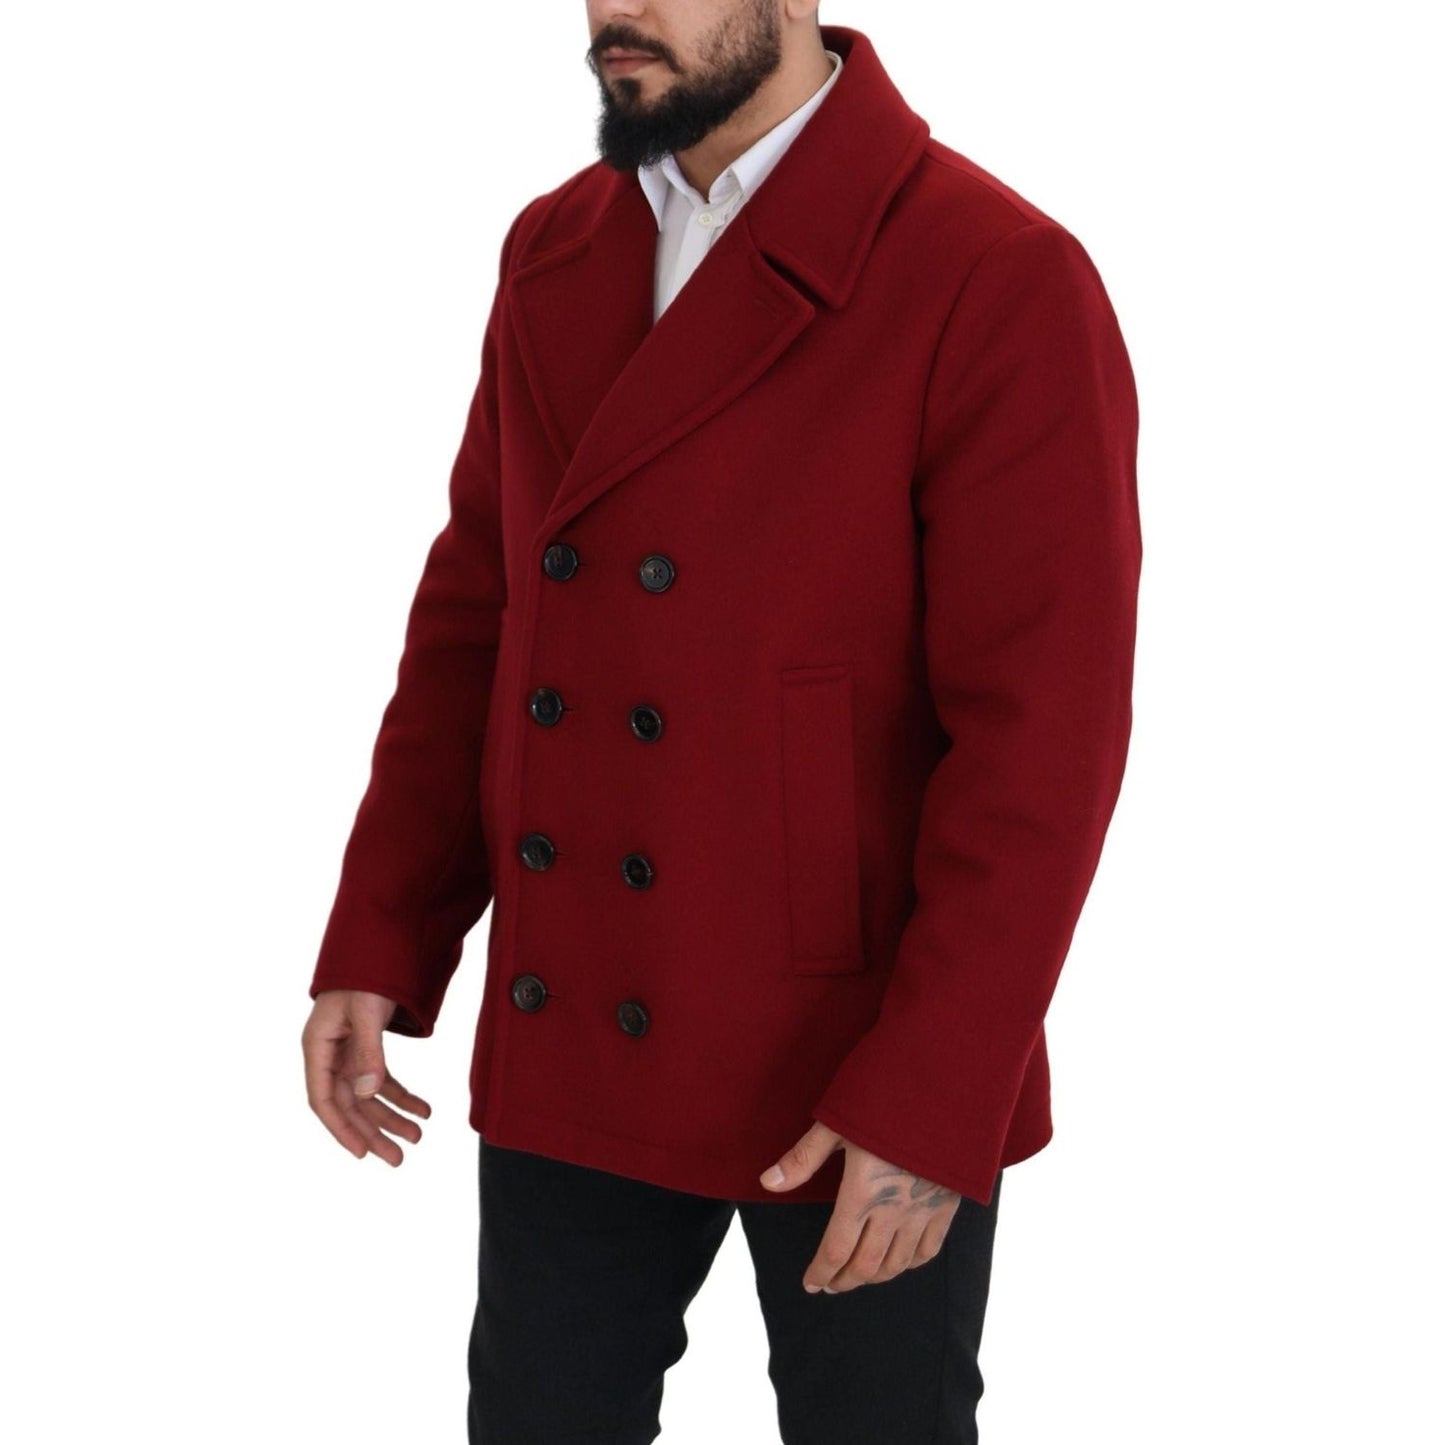 Dolce & Gabbana Elegant Red Double Breasted Wool Jacket red-wool-double-breasted-coat-jacket